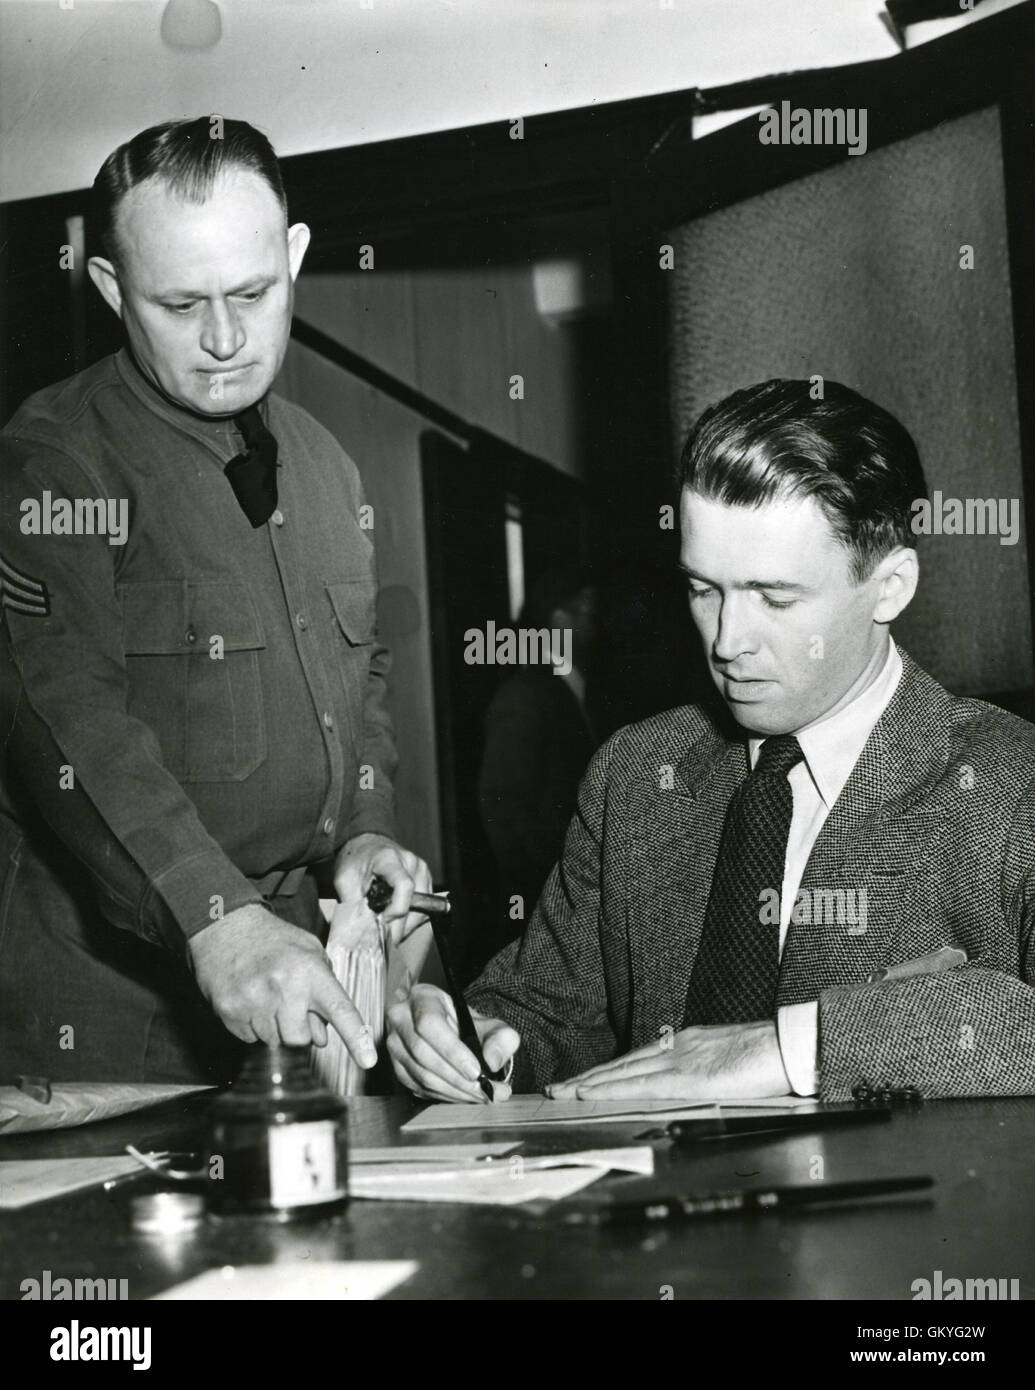 Movie actor James Stewart is shown as he enlisted in the U.S. Army. Stock Photo